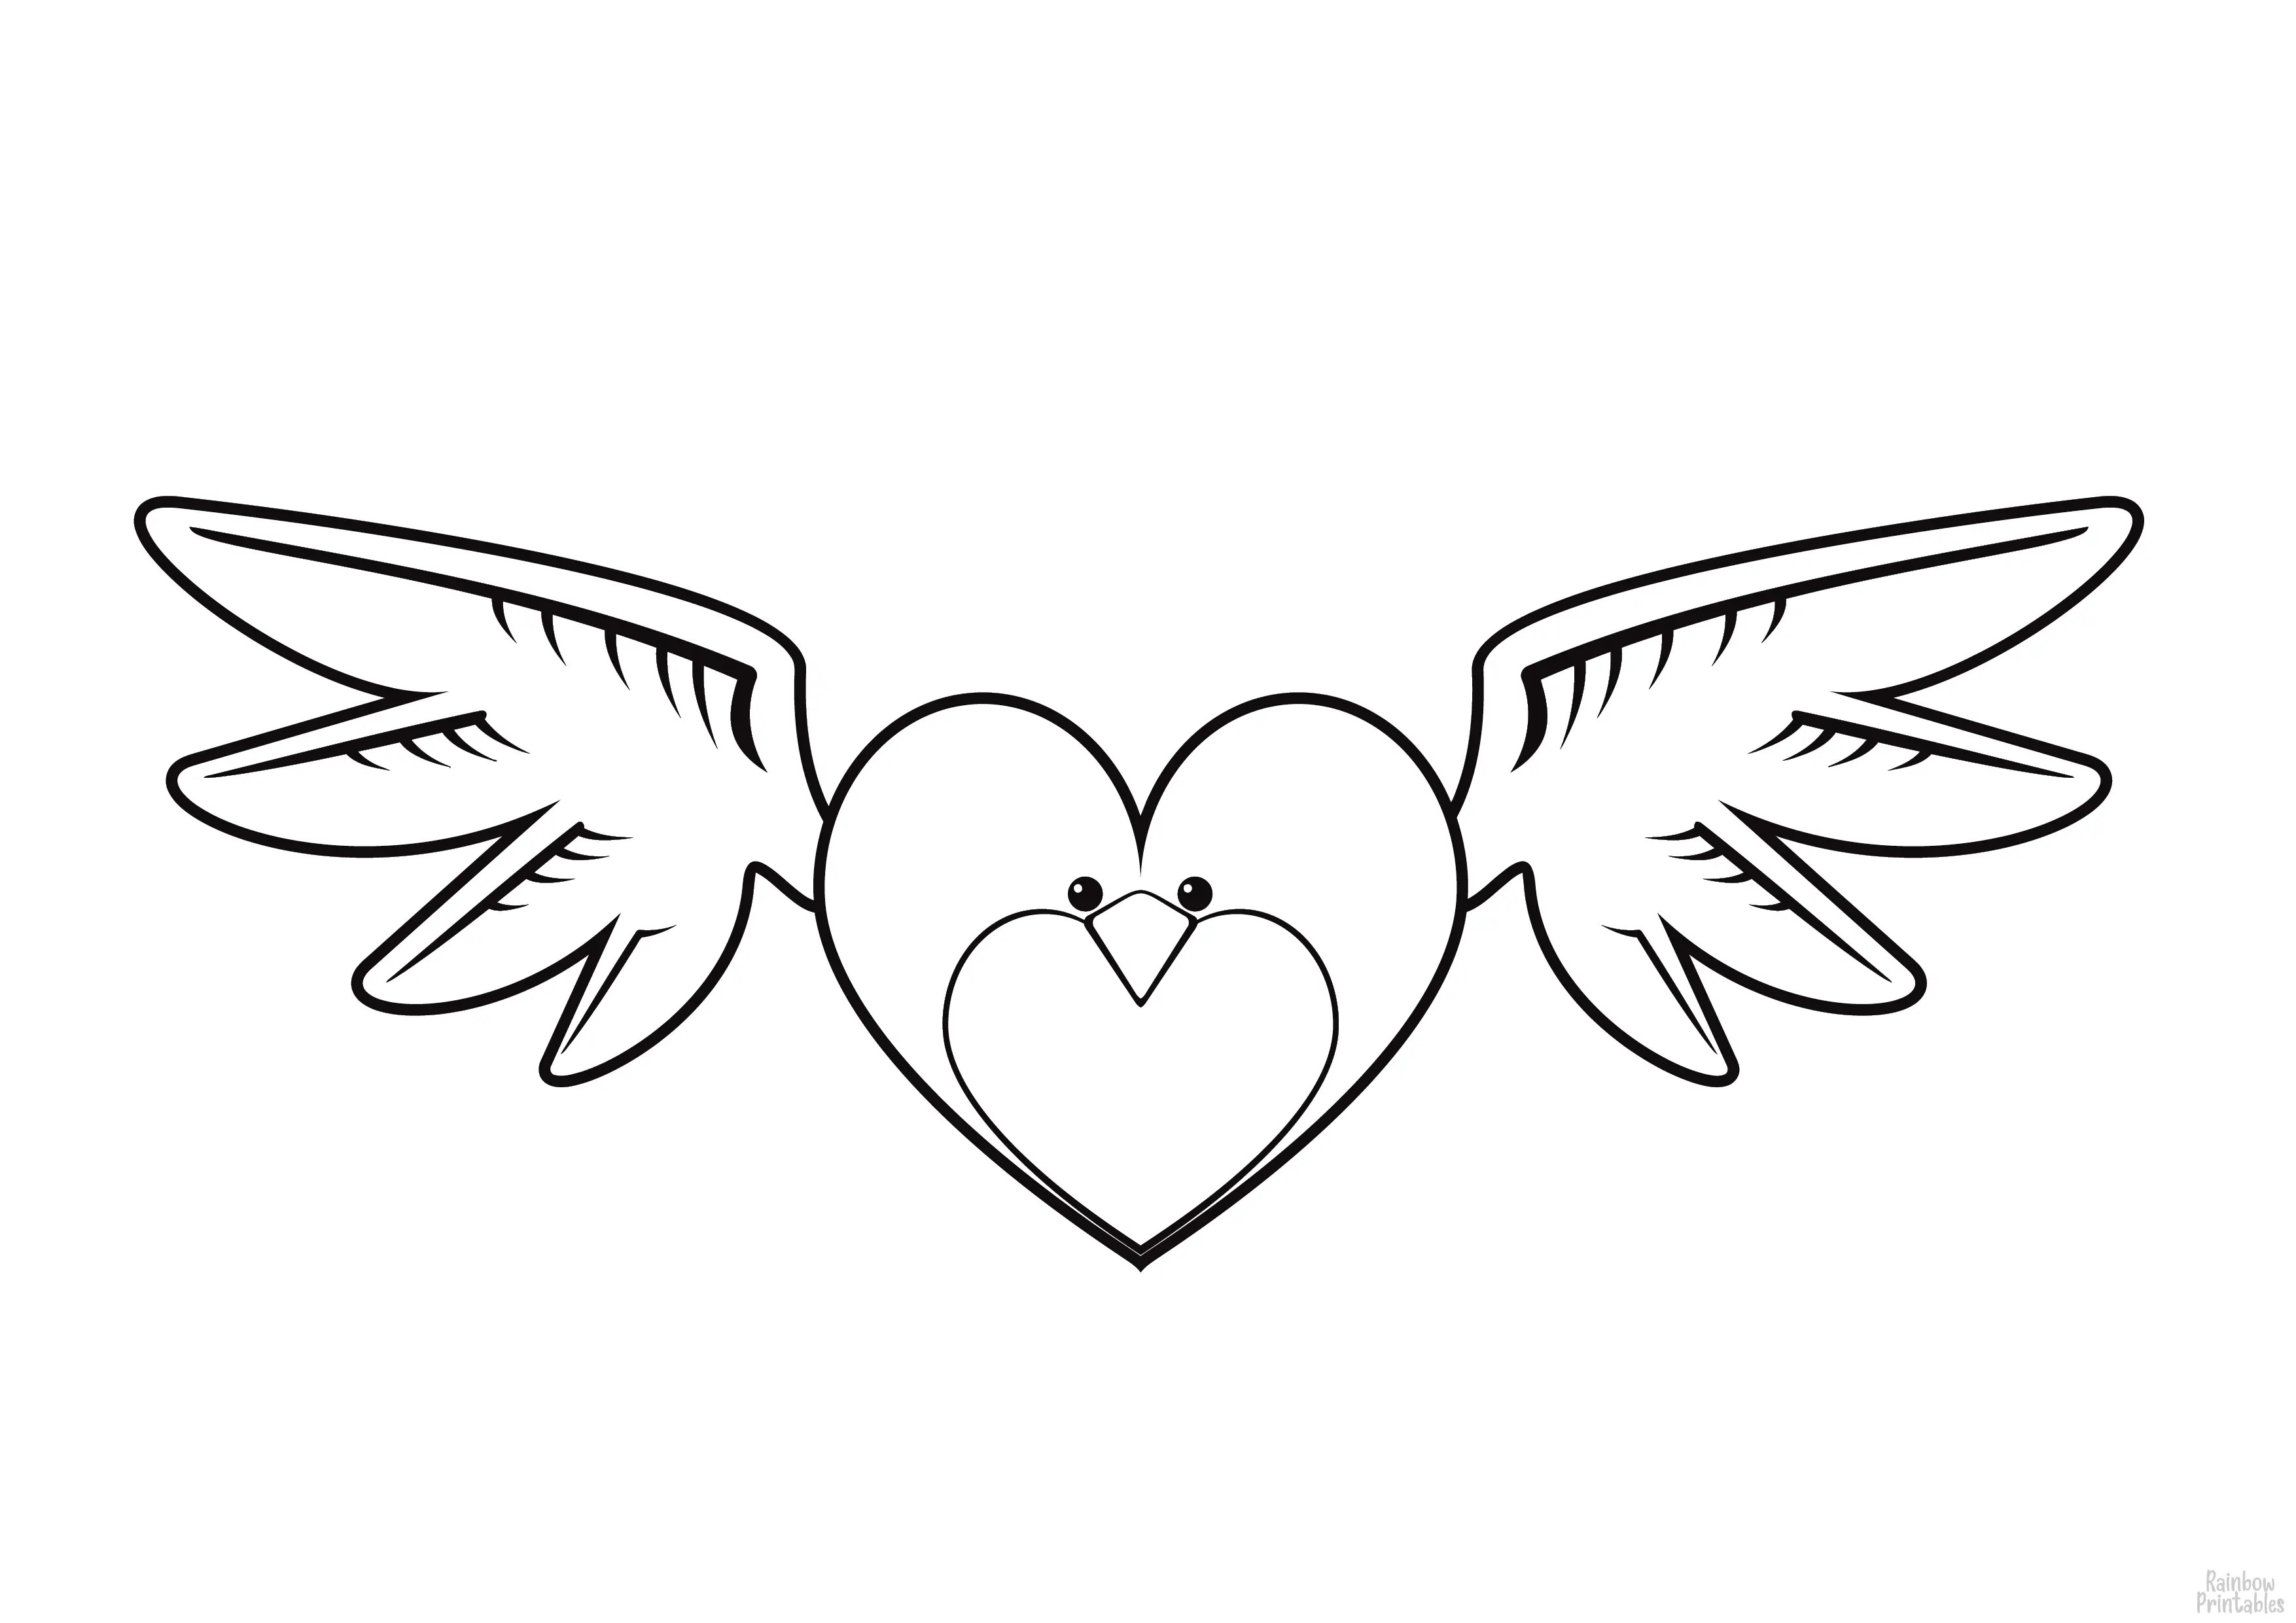 Valentine DAY PAGE HEART SHAPE BIRD Clipart Coloring Pages for Kids Adults Art Activities Line Art-08